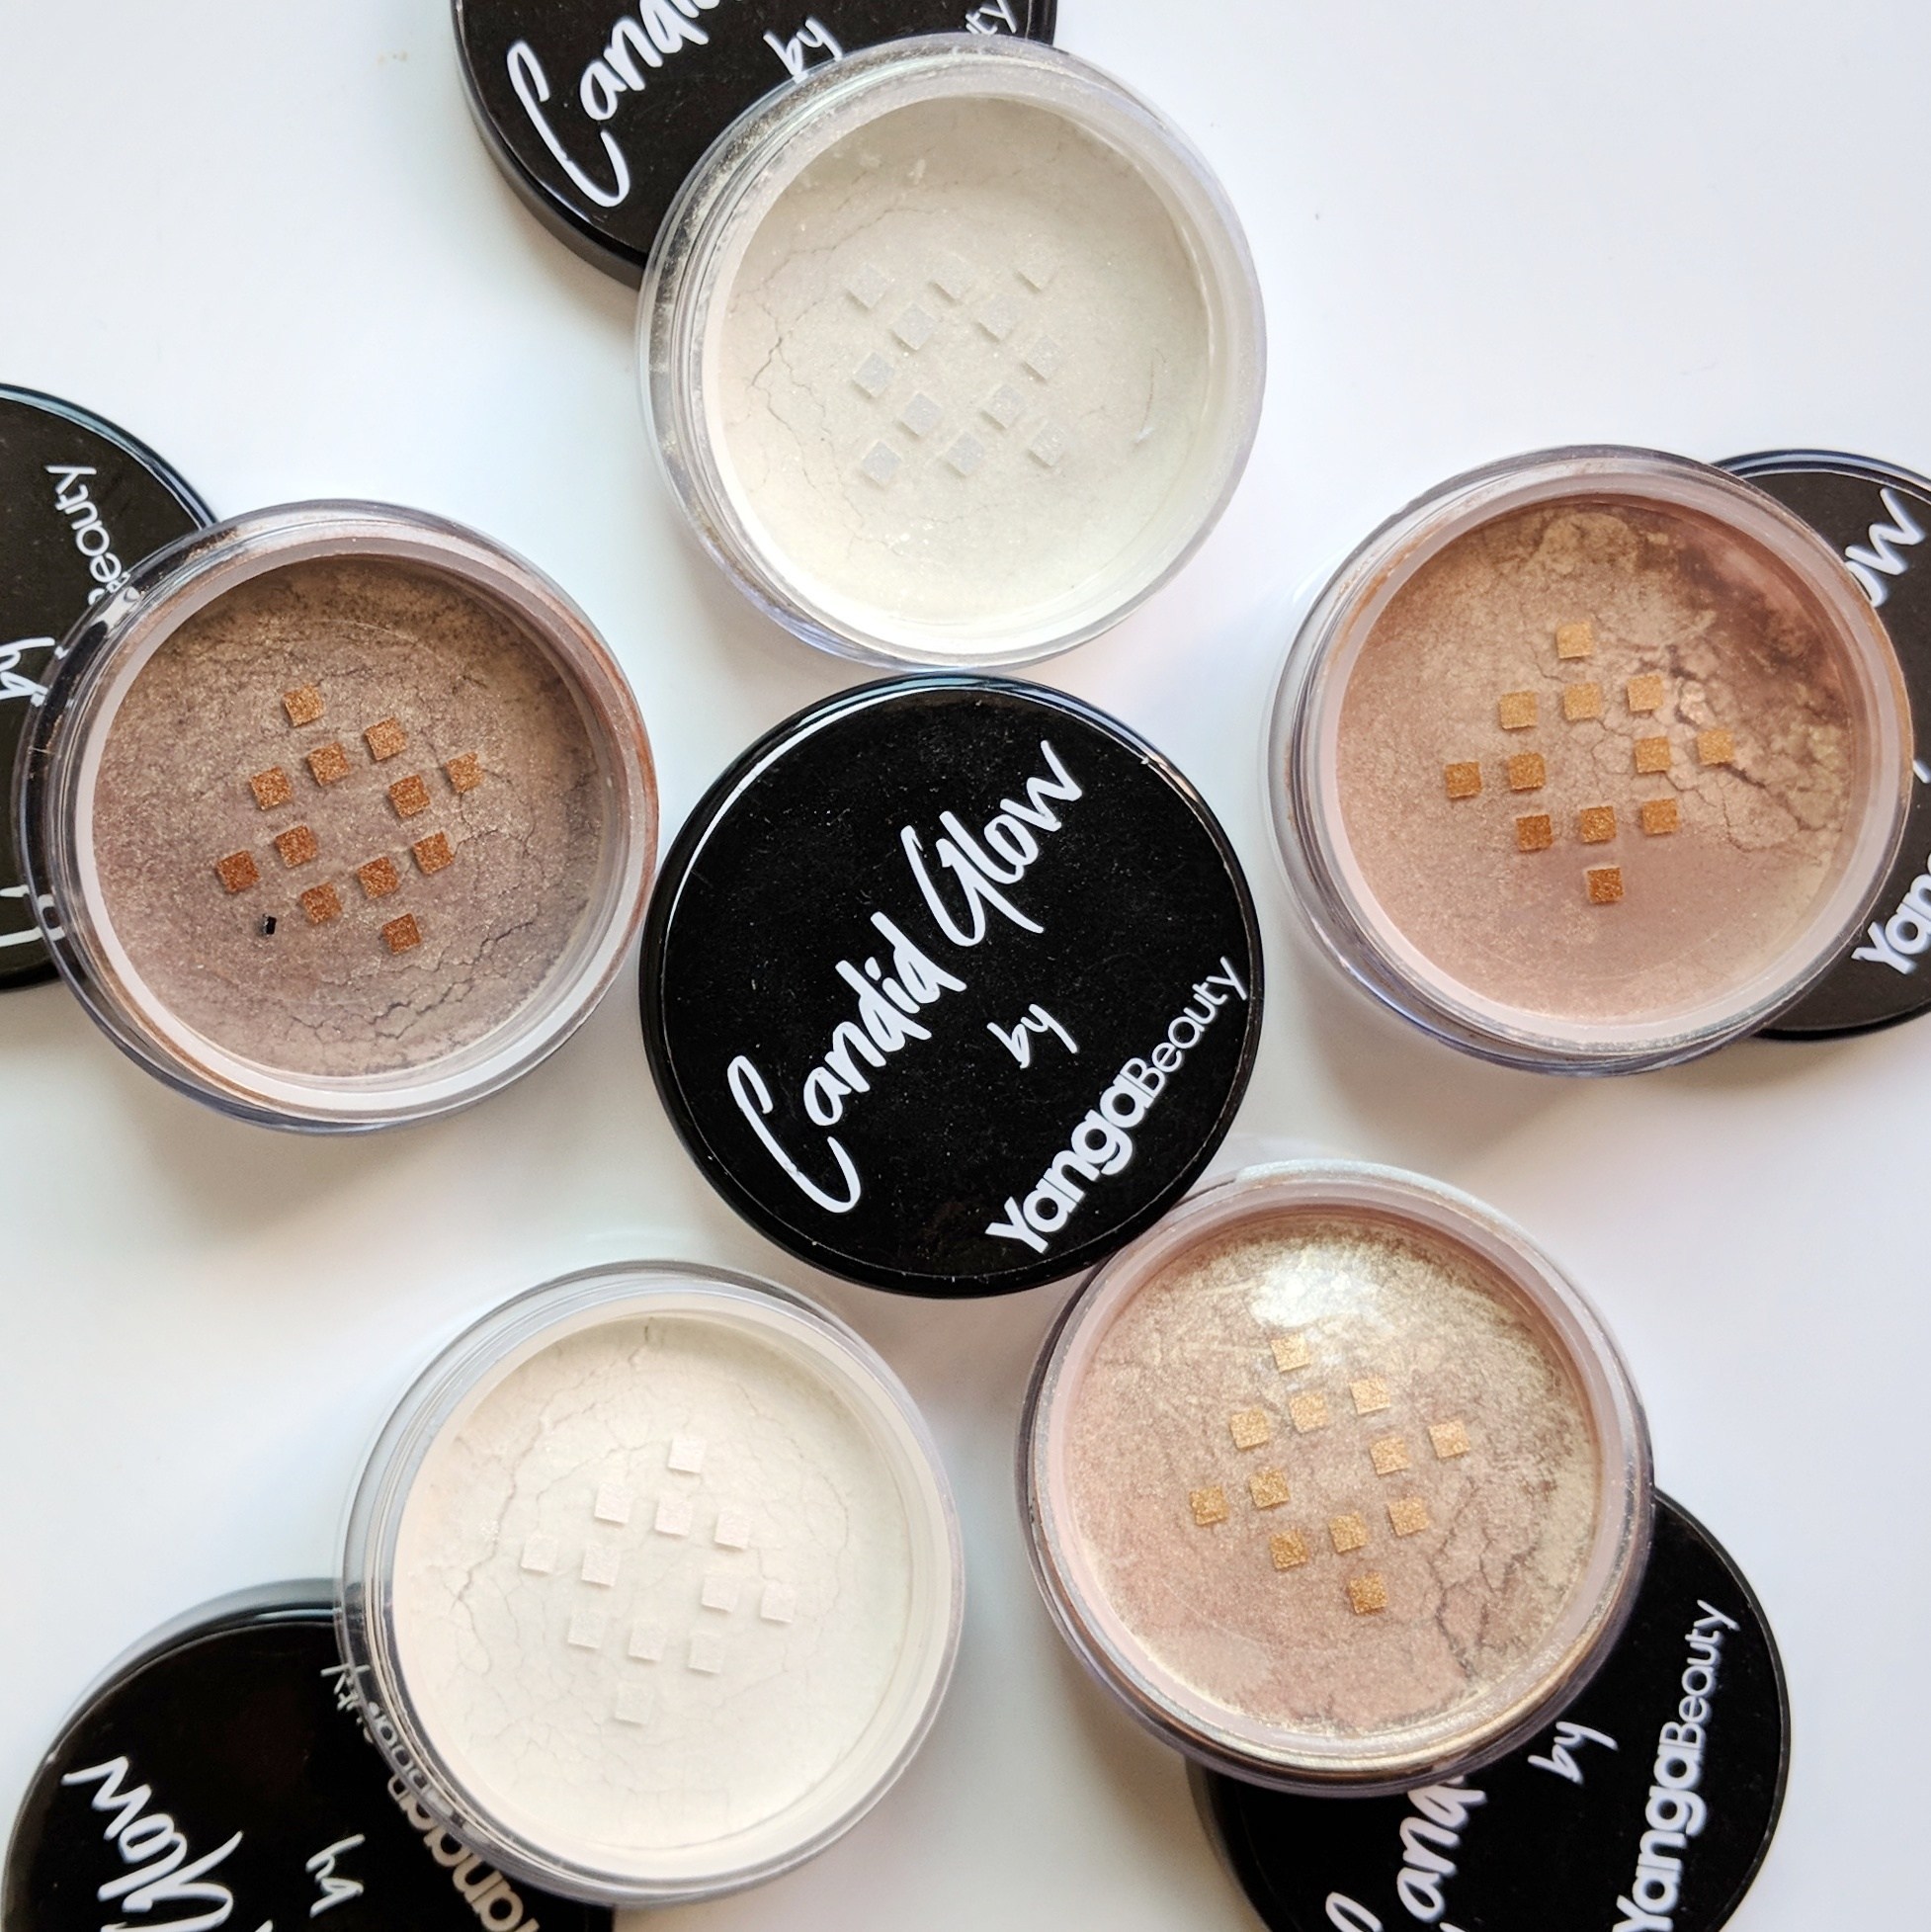 7 Most Affordable Drugstore Highlighters Under $10 - Mimiejay